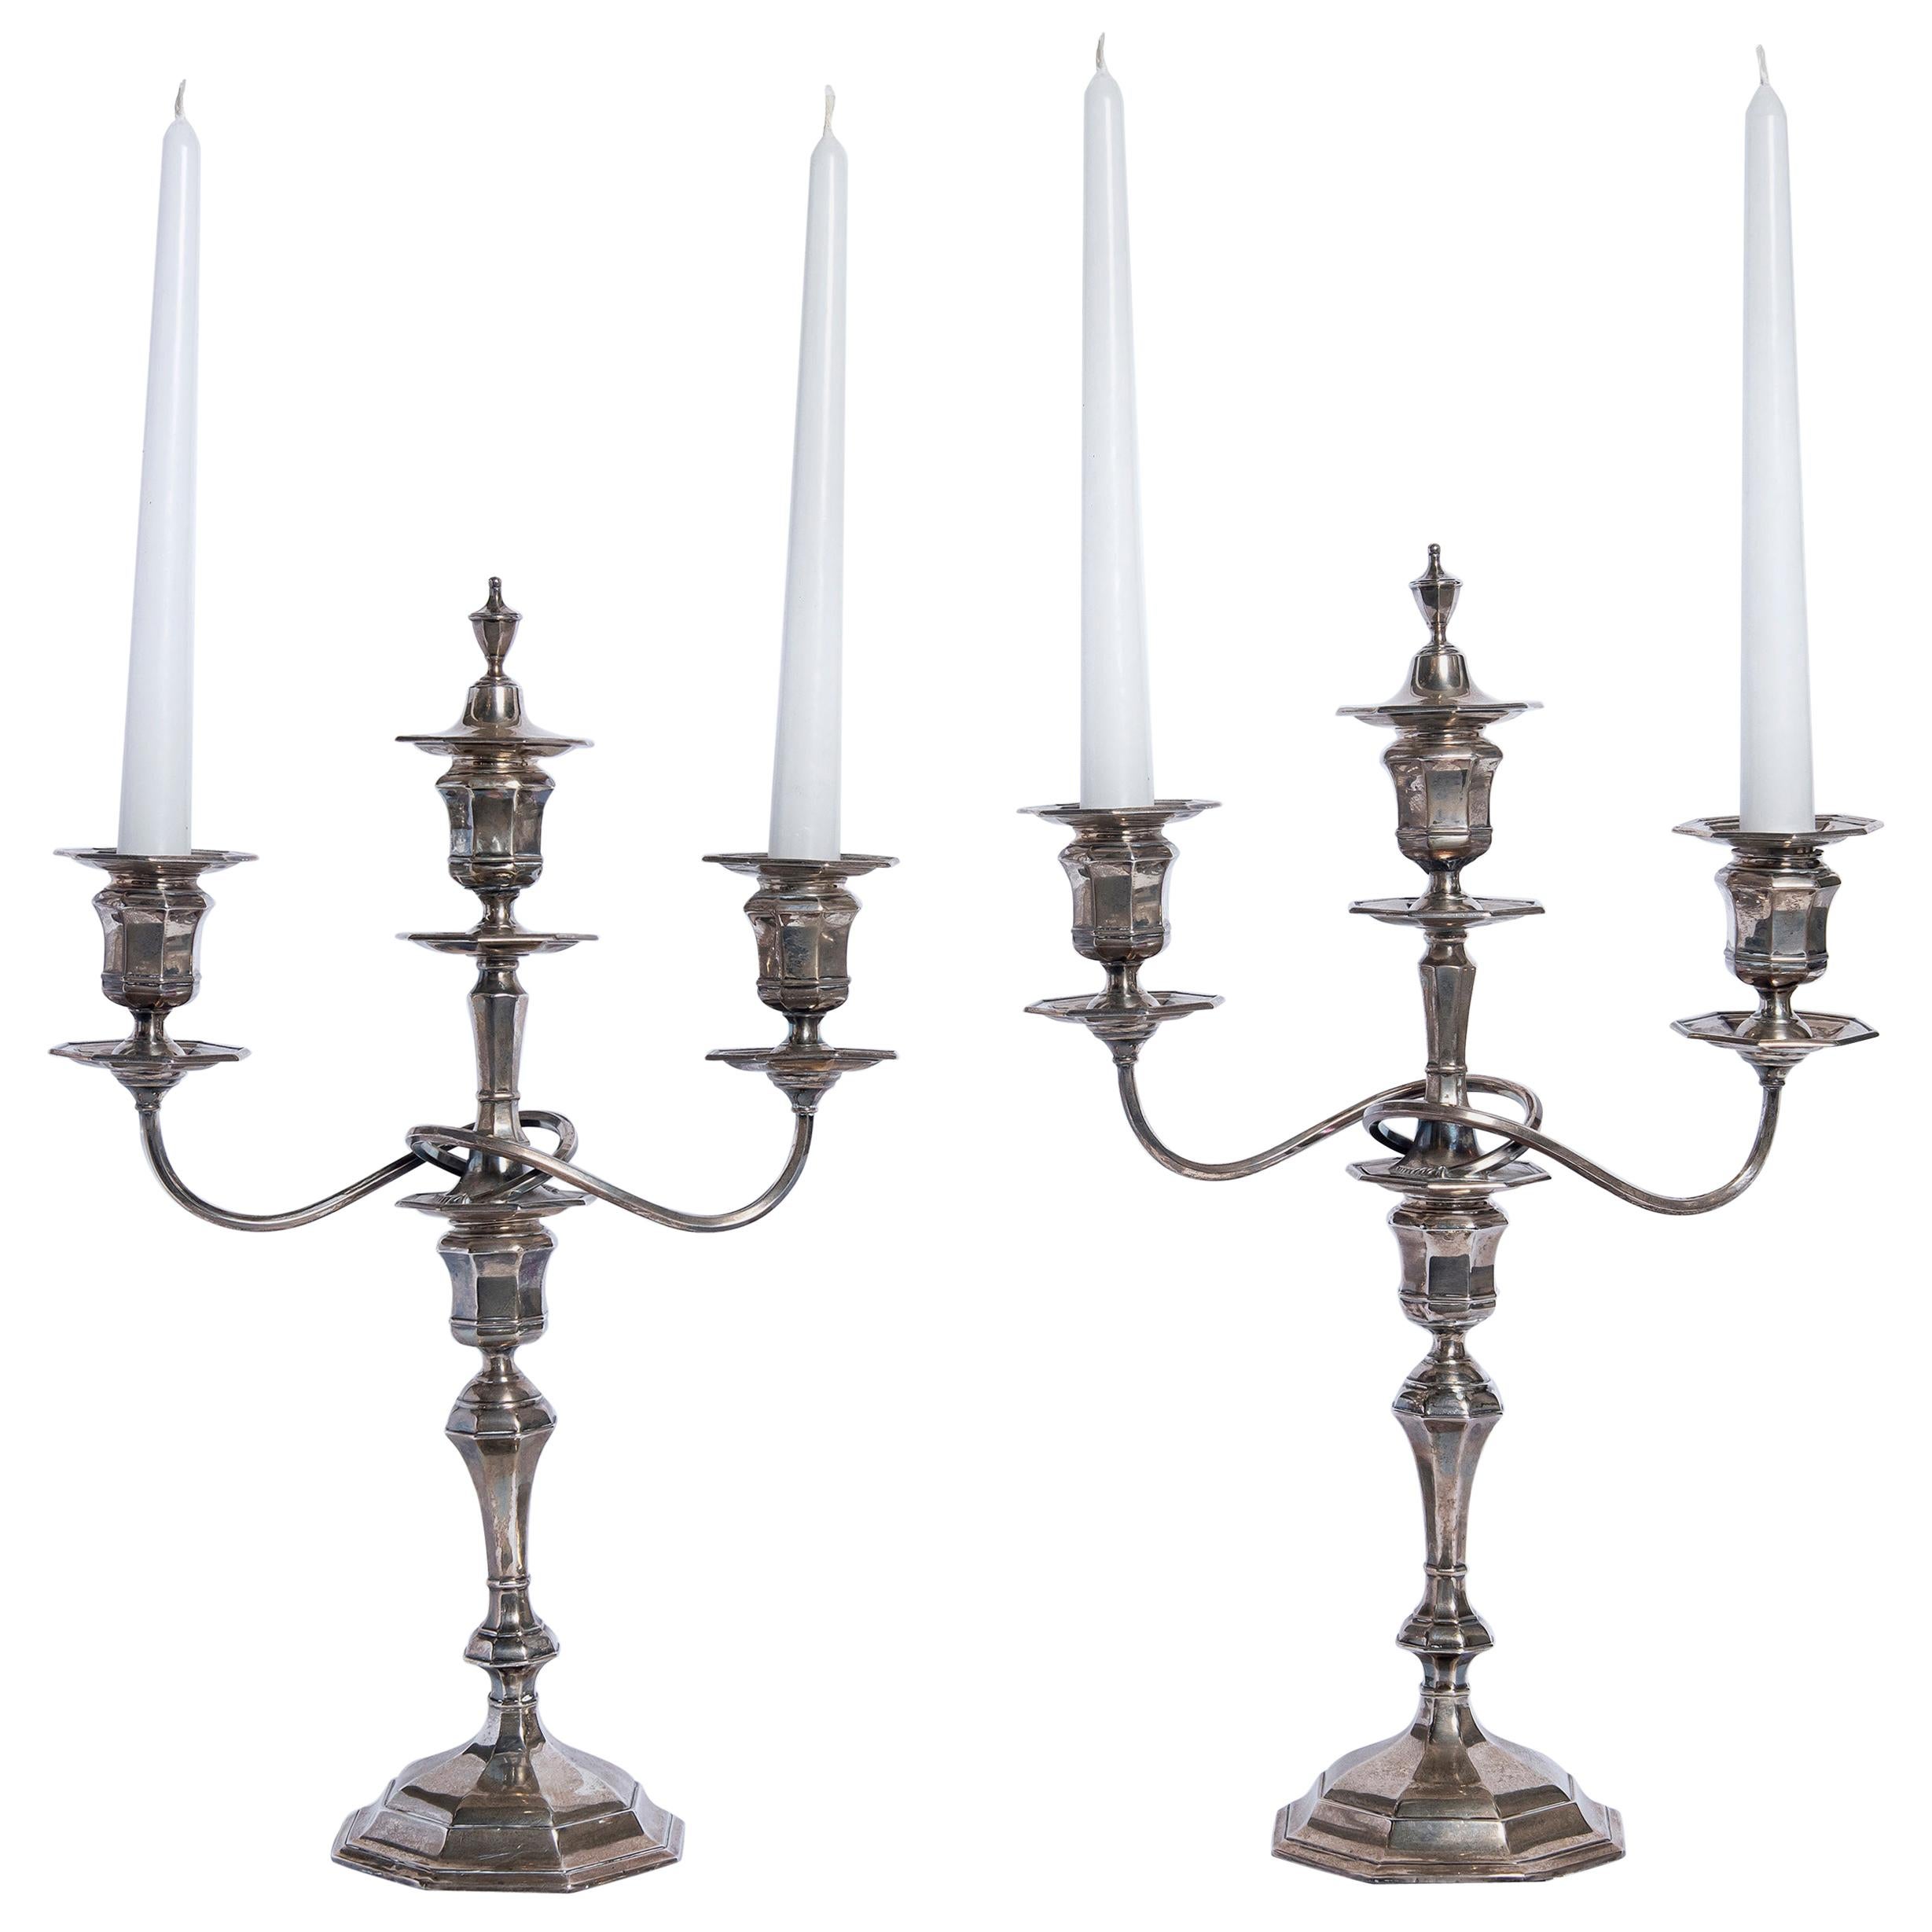 Pair of Silver Candelabras Sealed William Hutton & Sons Ltd., England, 1920